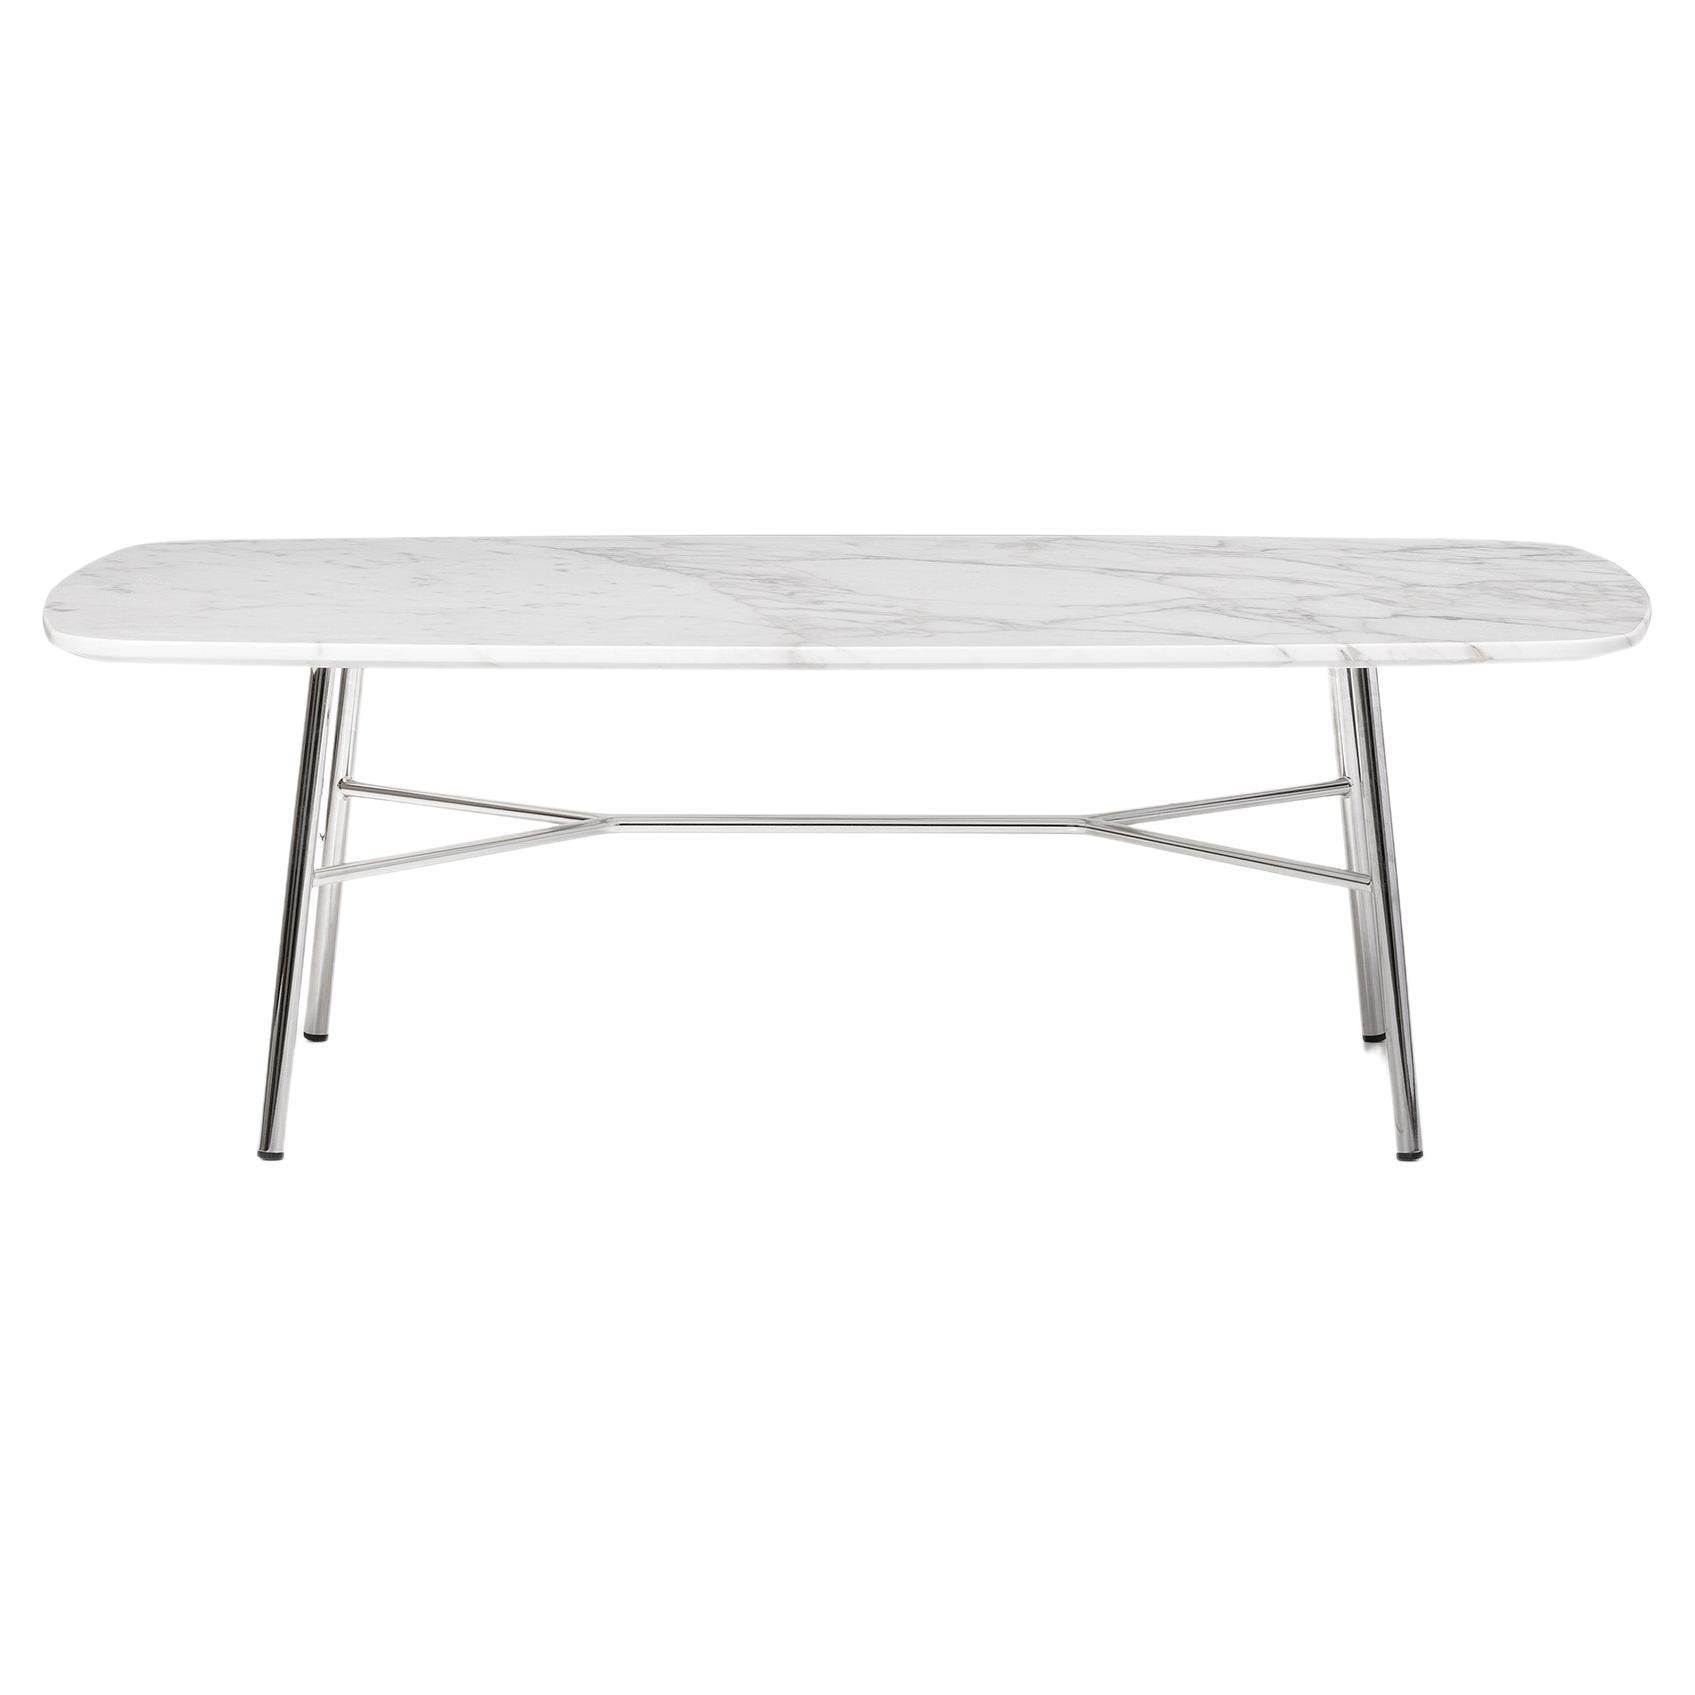 Coffee table, with metal frame, painted in standard or special colors, top available in glass ceramic color white Calacatta marble, measures: 110 x 70 cm.
Whether it’s square, rectangular, oval or round, Yuki Little Table comes in several shapes,